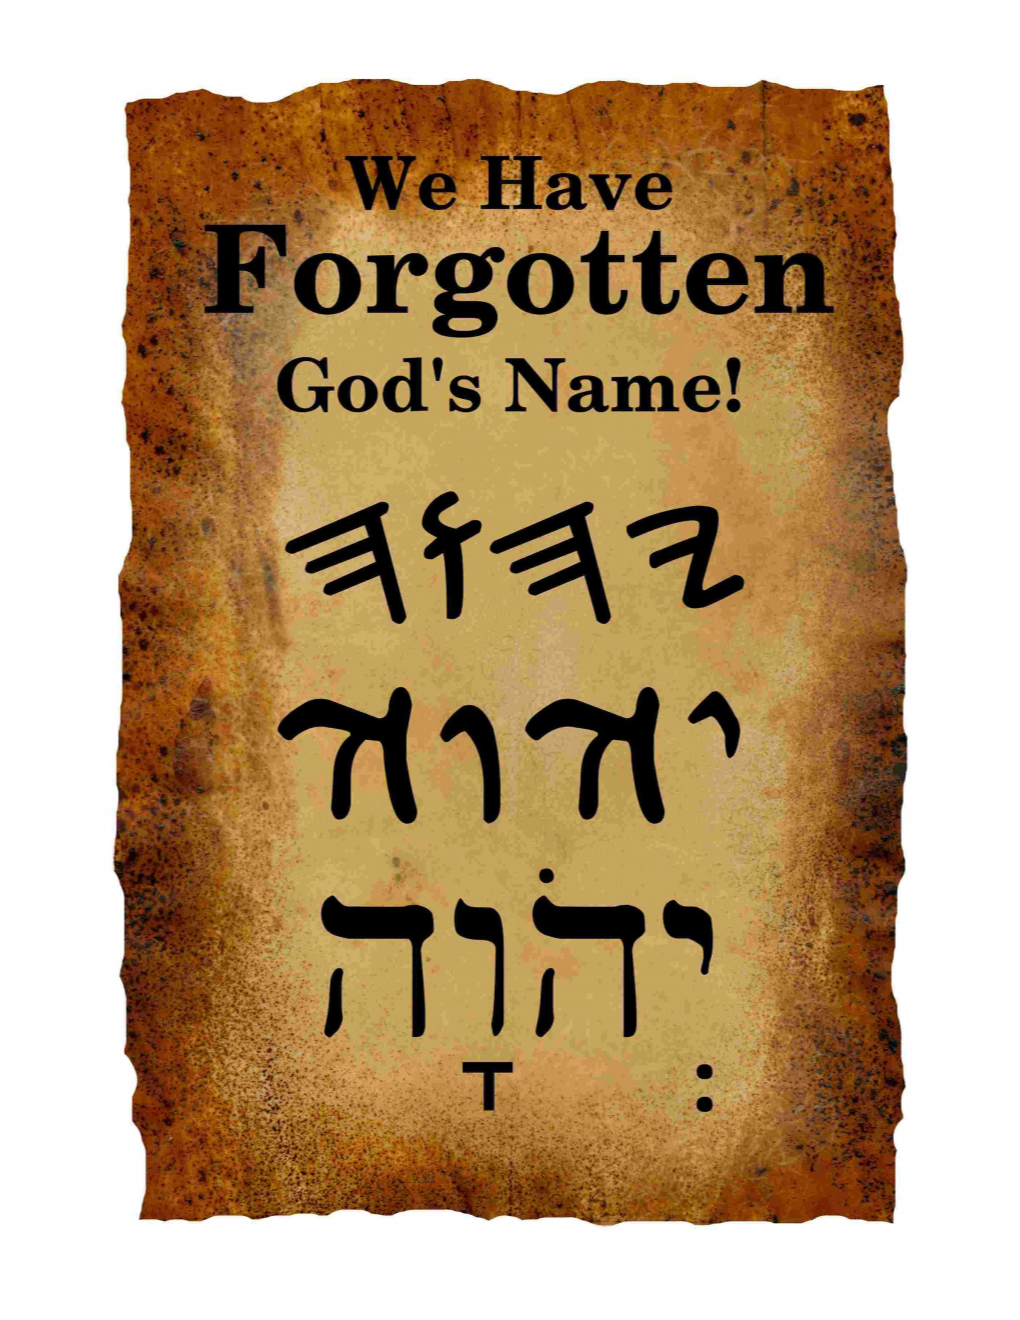 We Have Forgotten God's Name! by David Ford